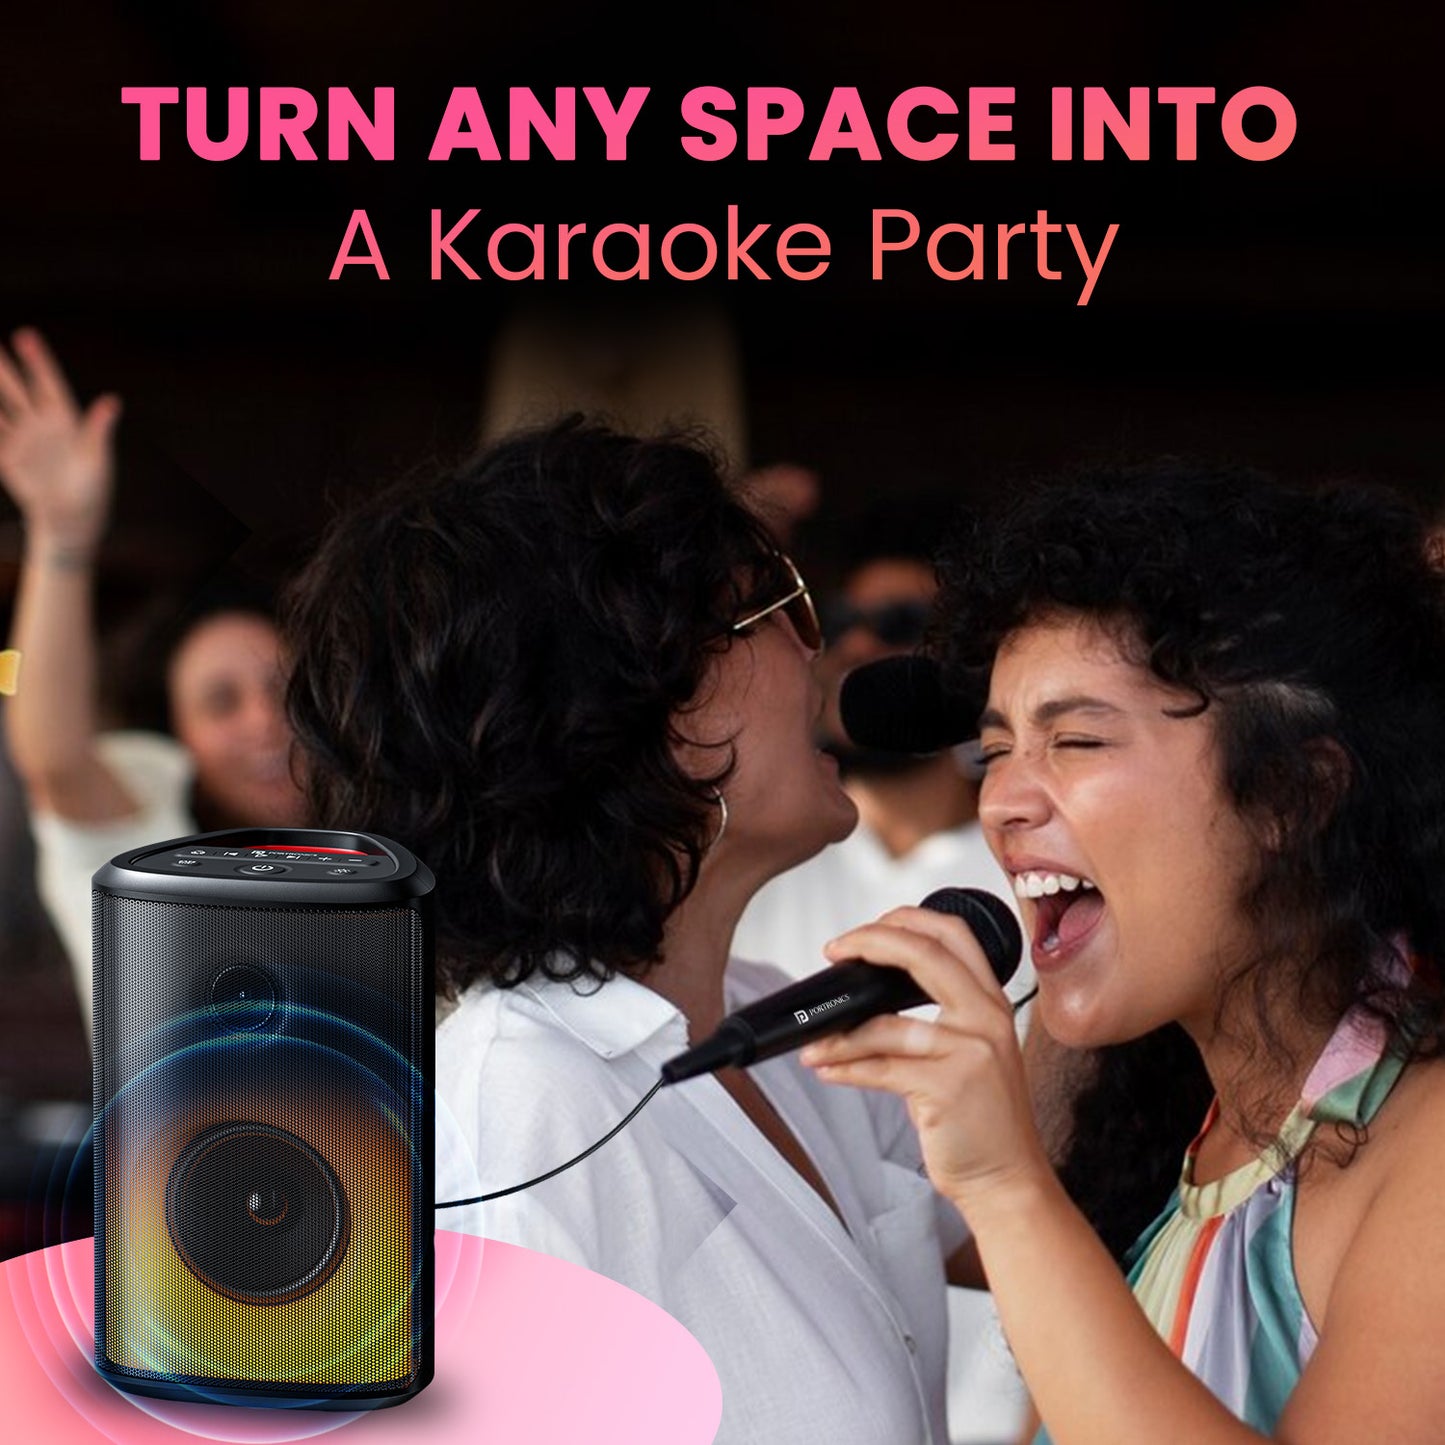 Black Portronics Dash 8 portable bluetooth party speaker comes with wired karaoke mic to sing your own song